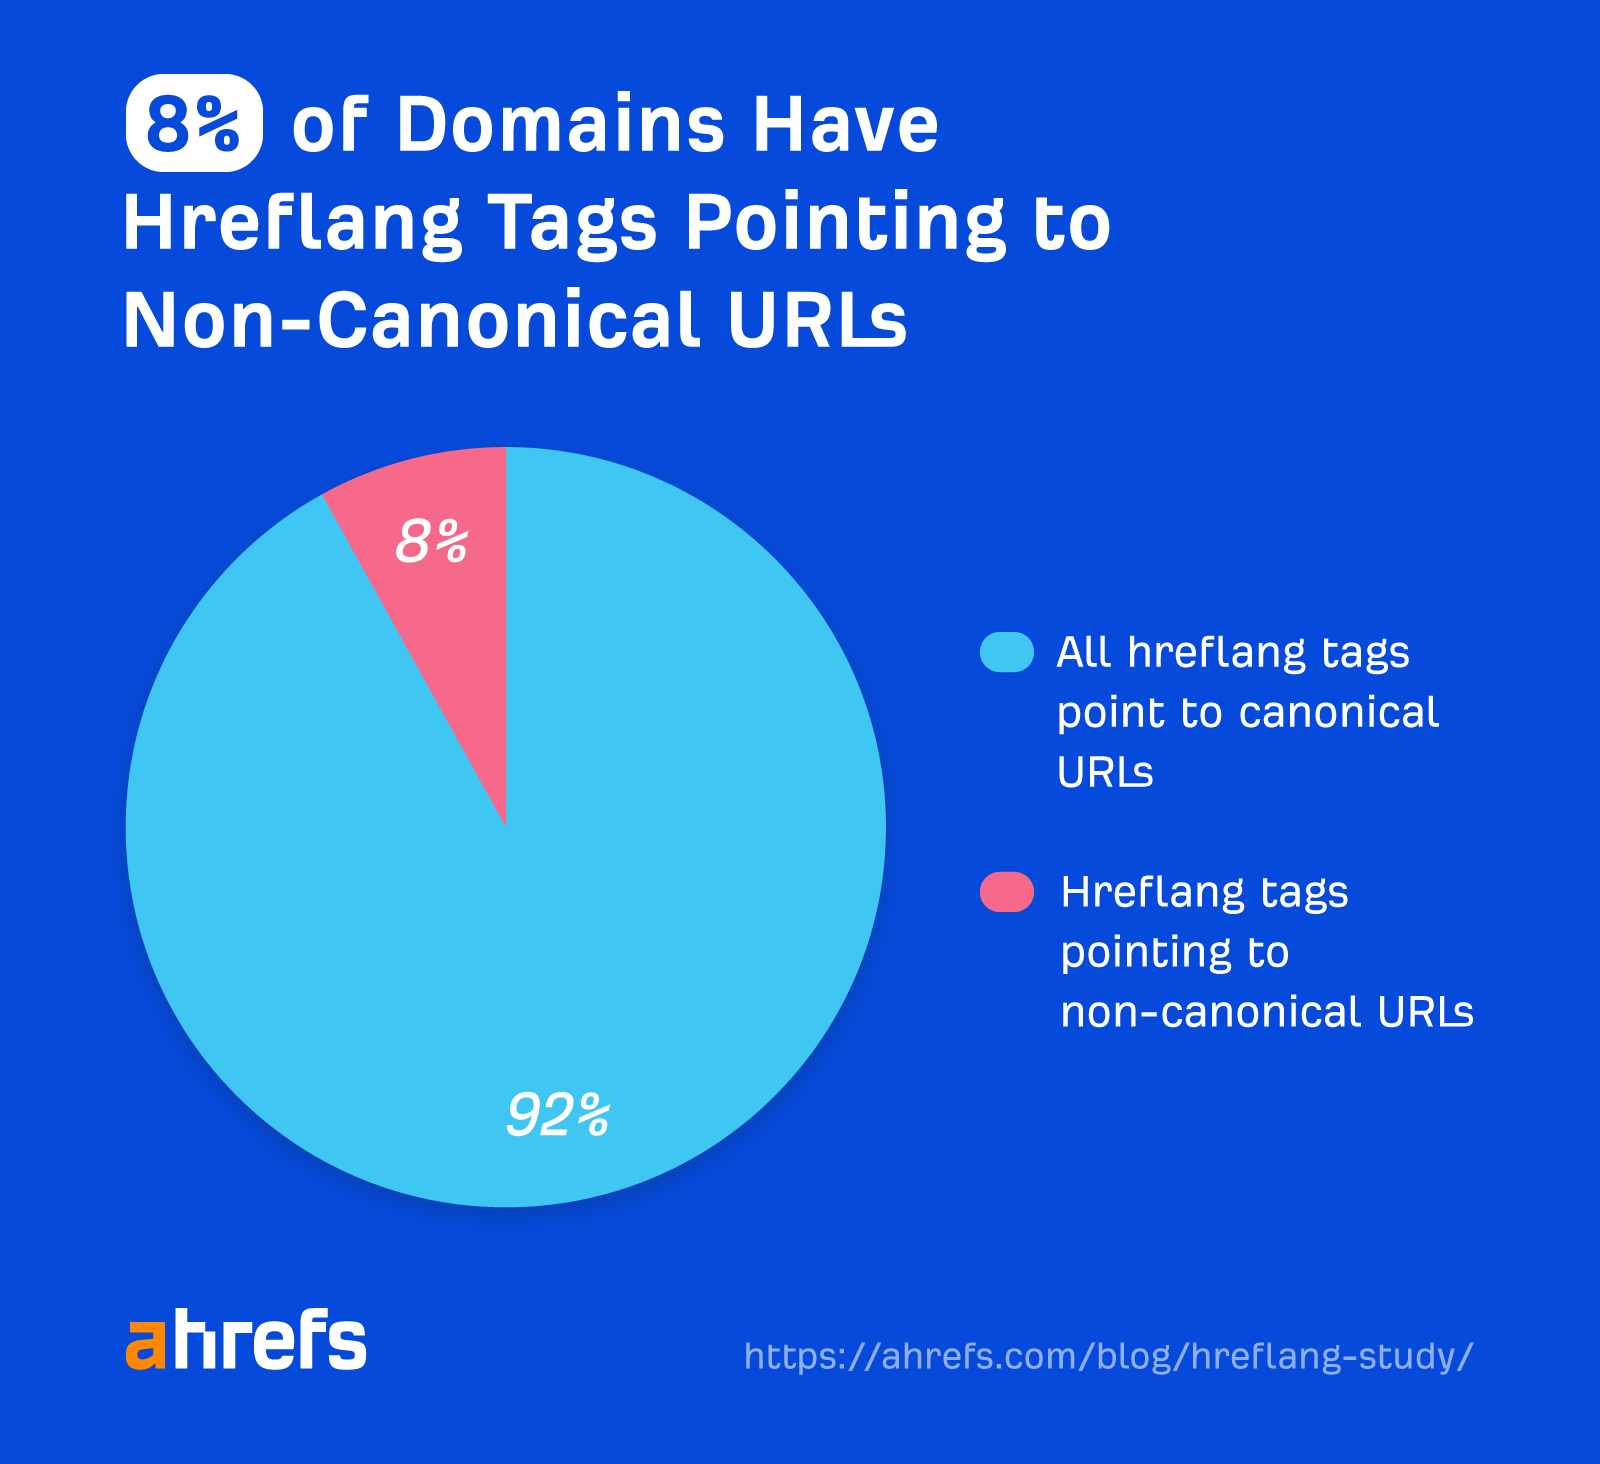 8% of domains have hreflang tags pointing to non-canonical URLs